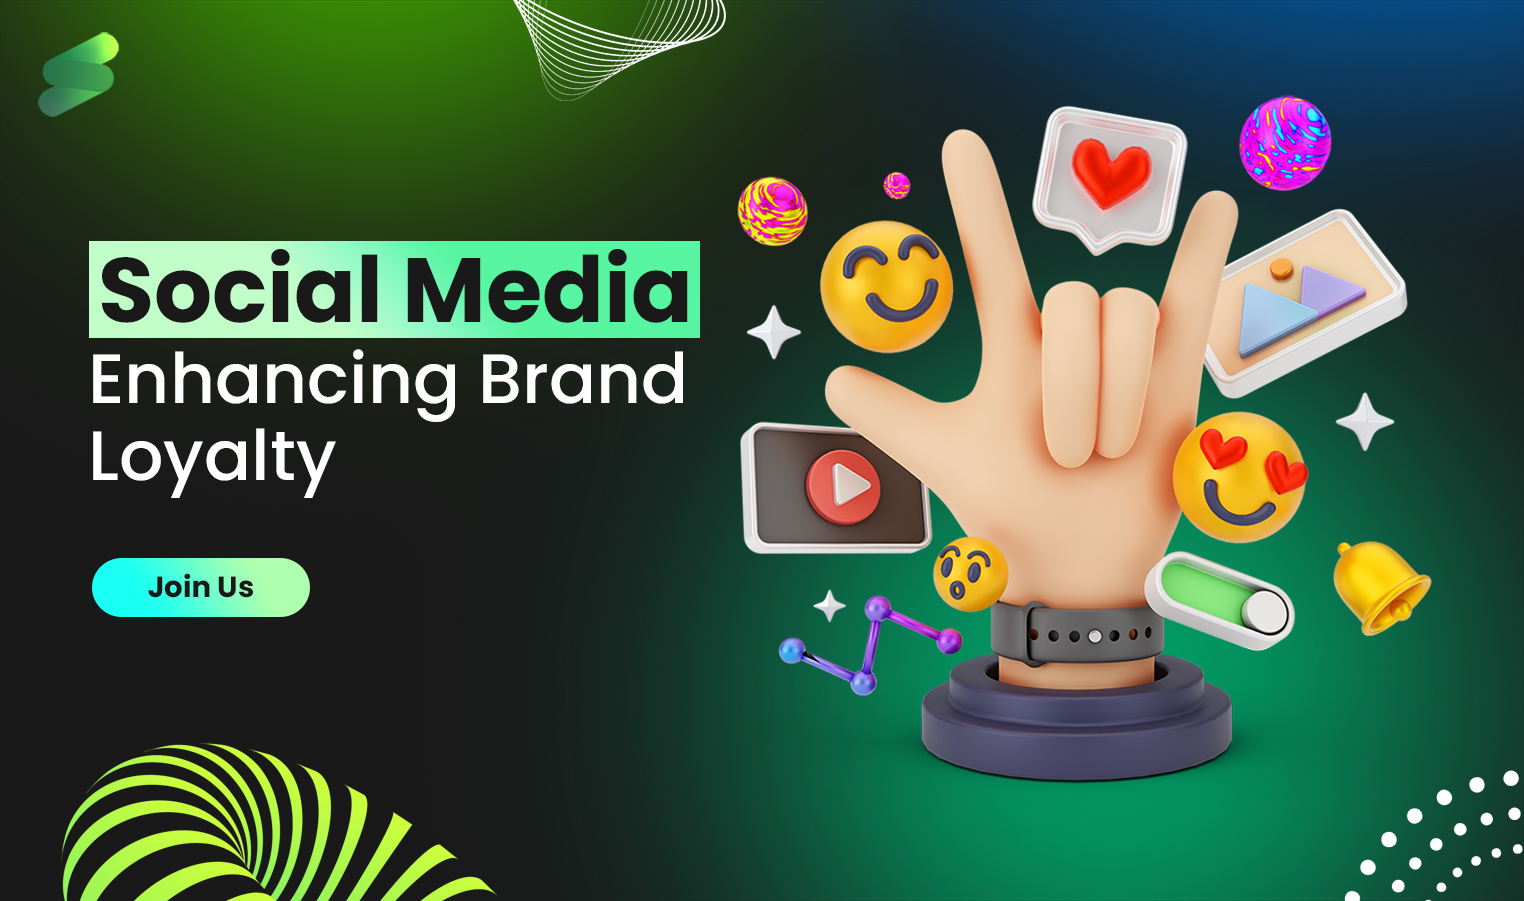 The Benefits of Social Media for Enhancing Brand Loyalty and Positive Corporate Image